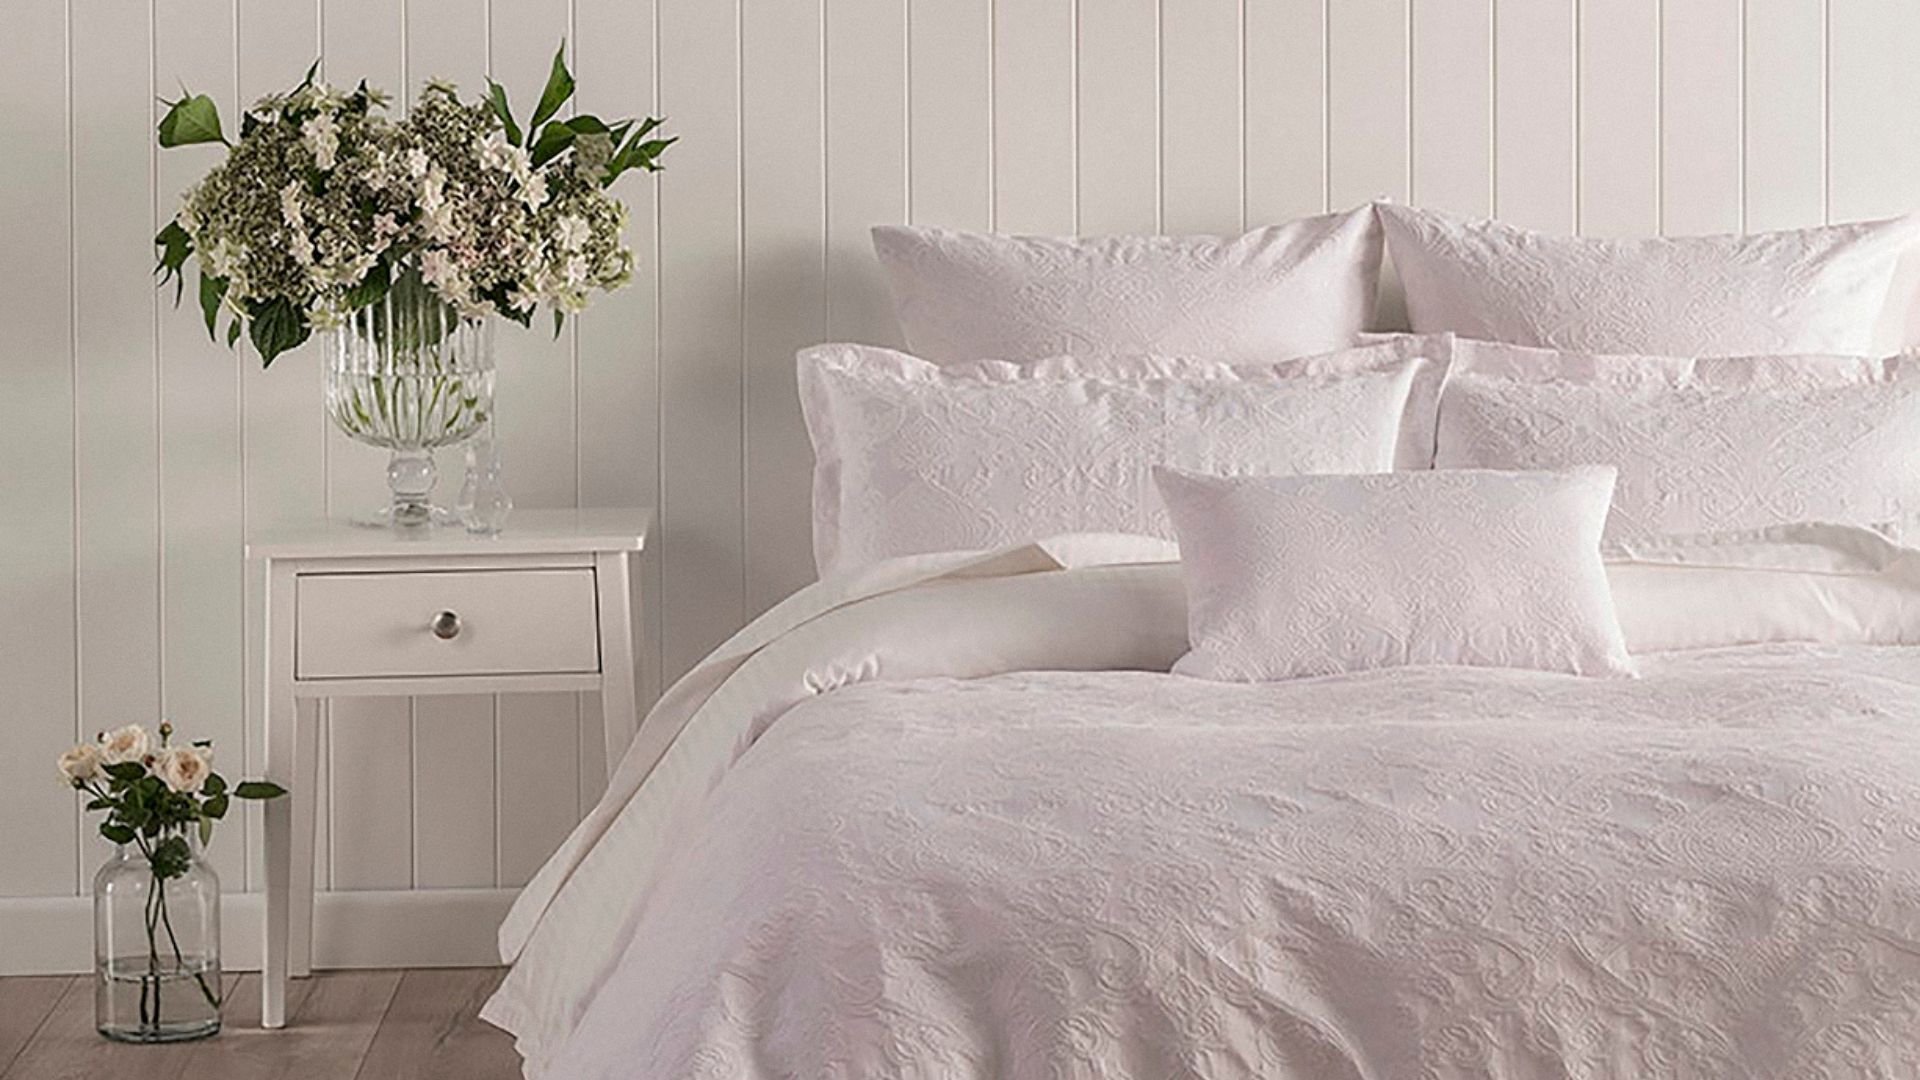 Storing Linen Creatively: Organising and Maximising Space for Your Bed Linens